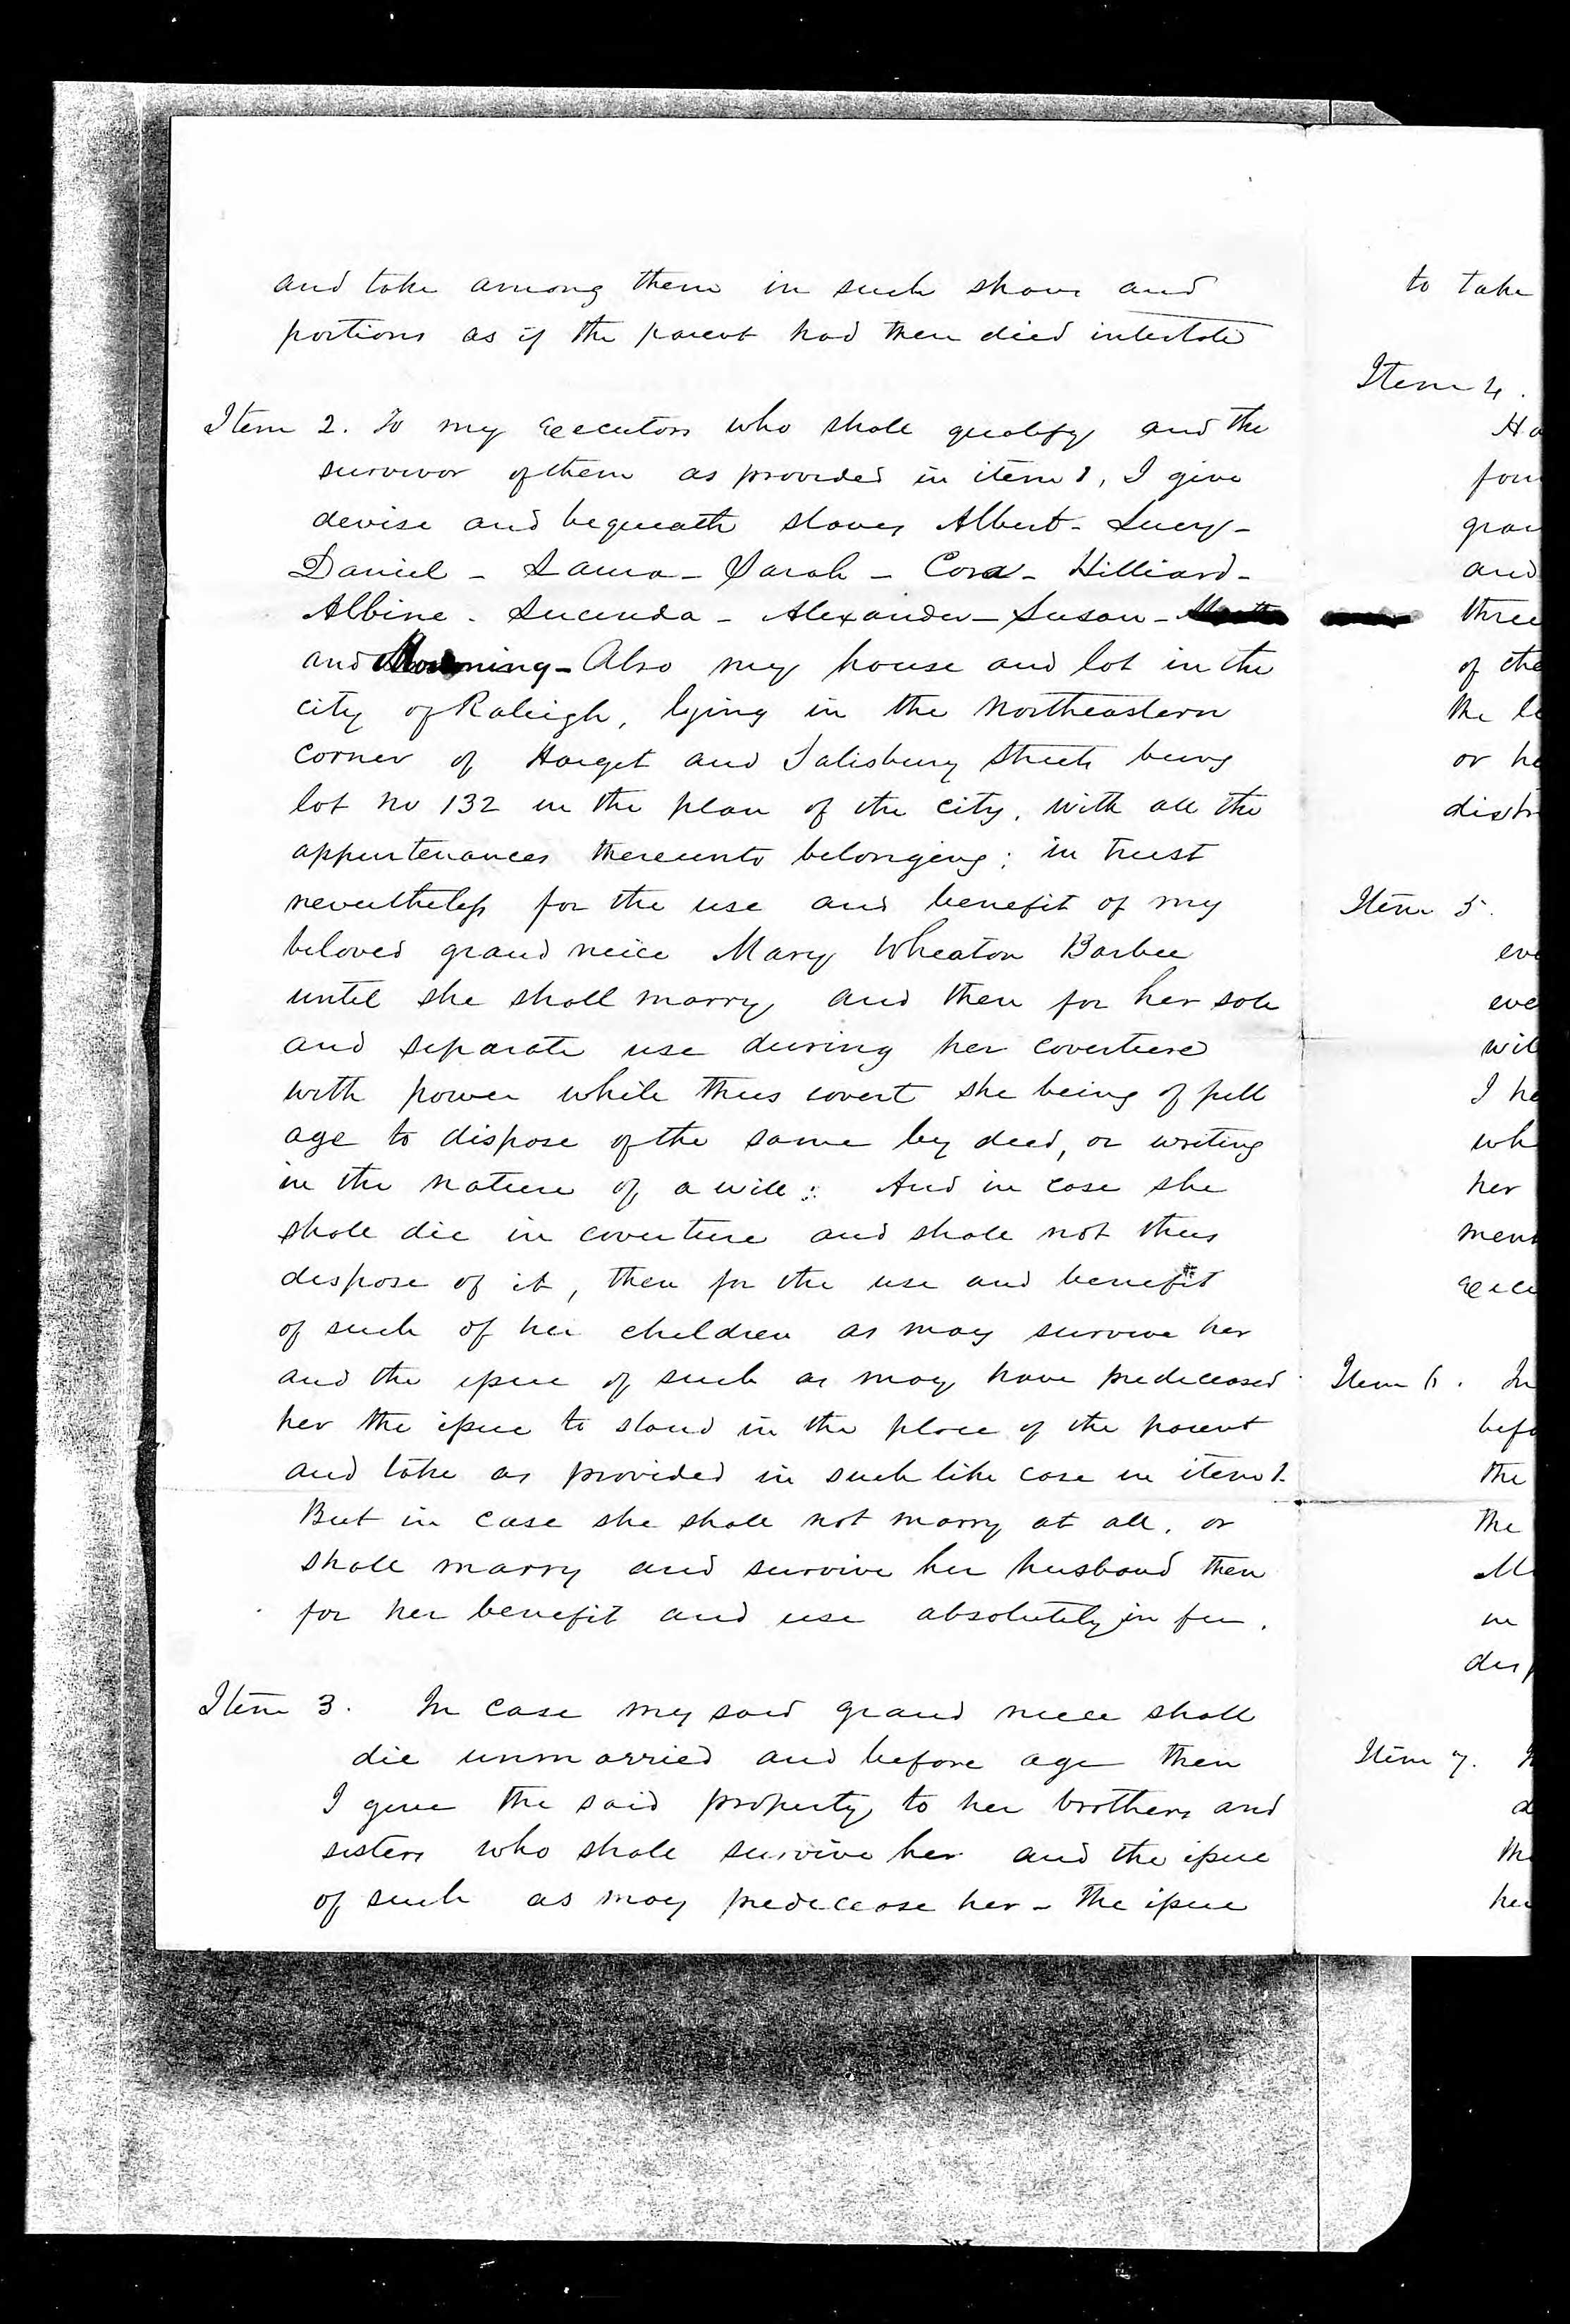 Will of Mary R. Wheaton, November 9, 1858, page 2